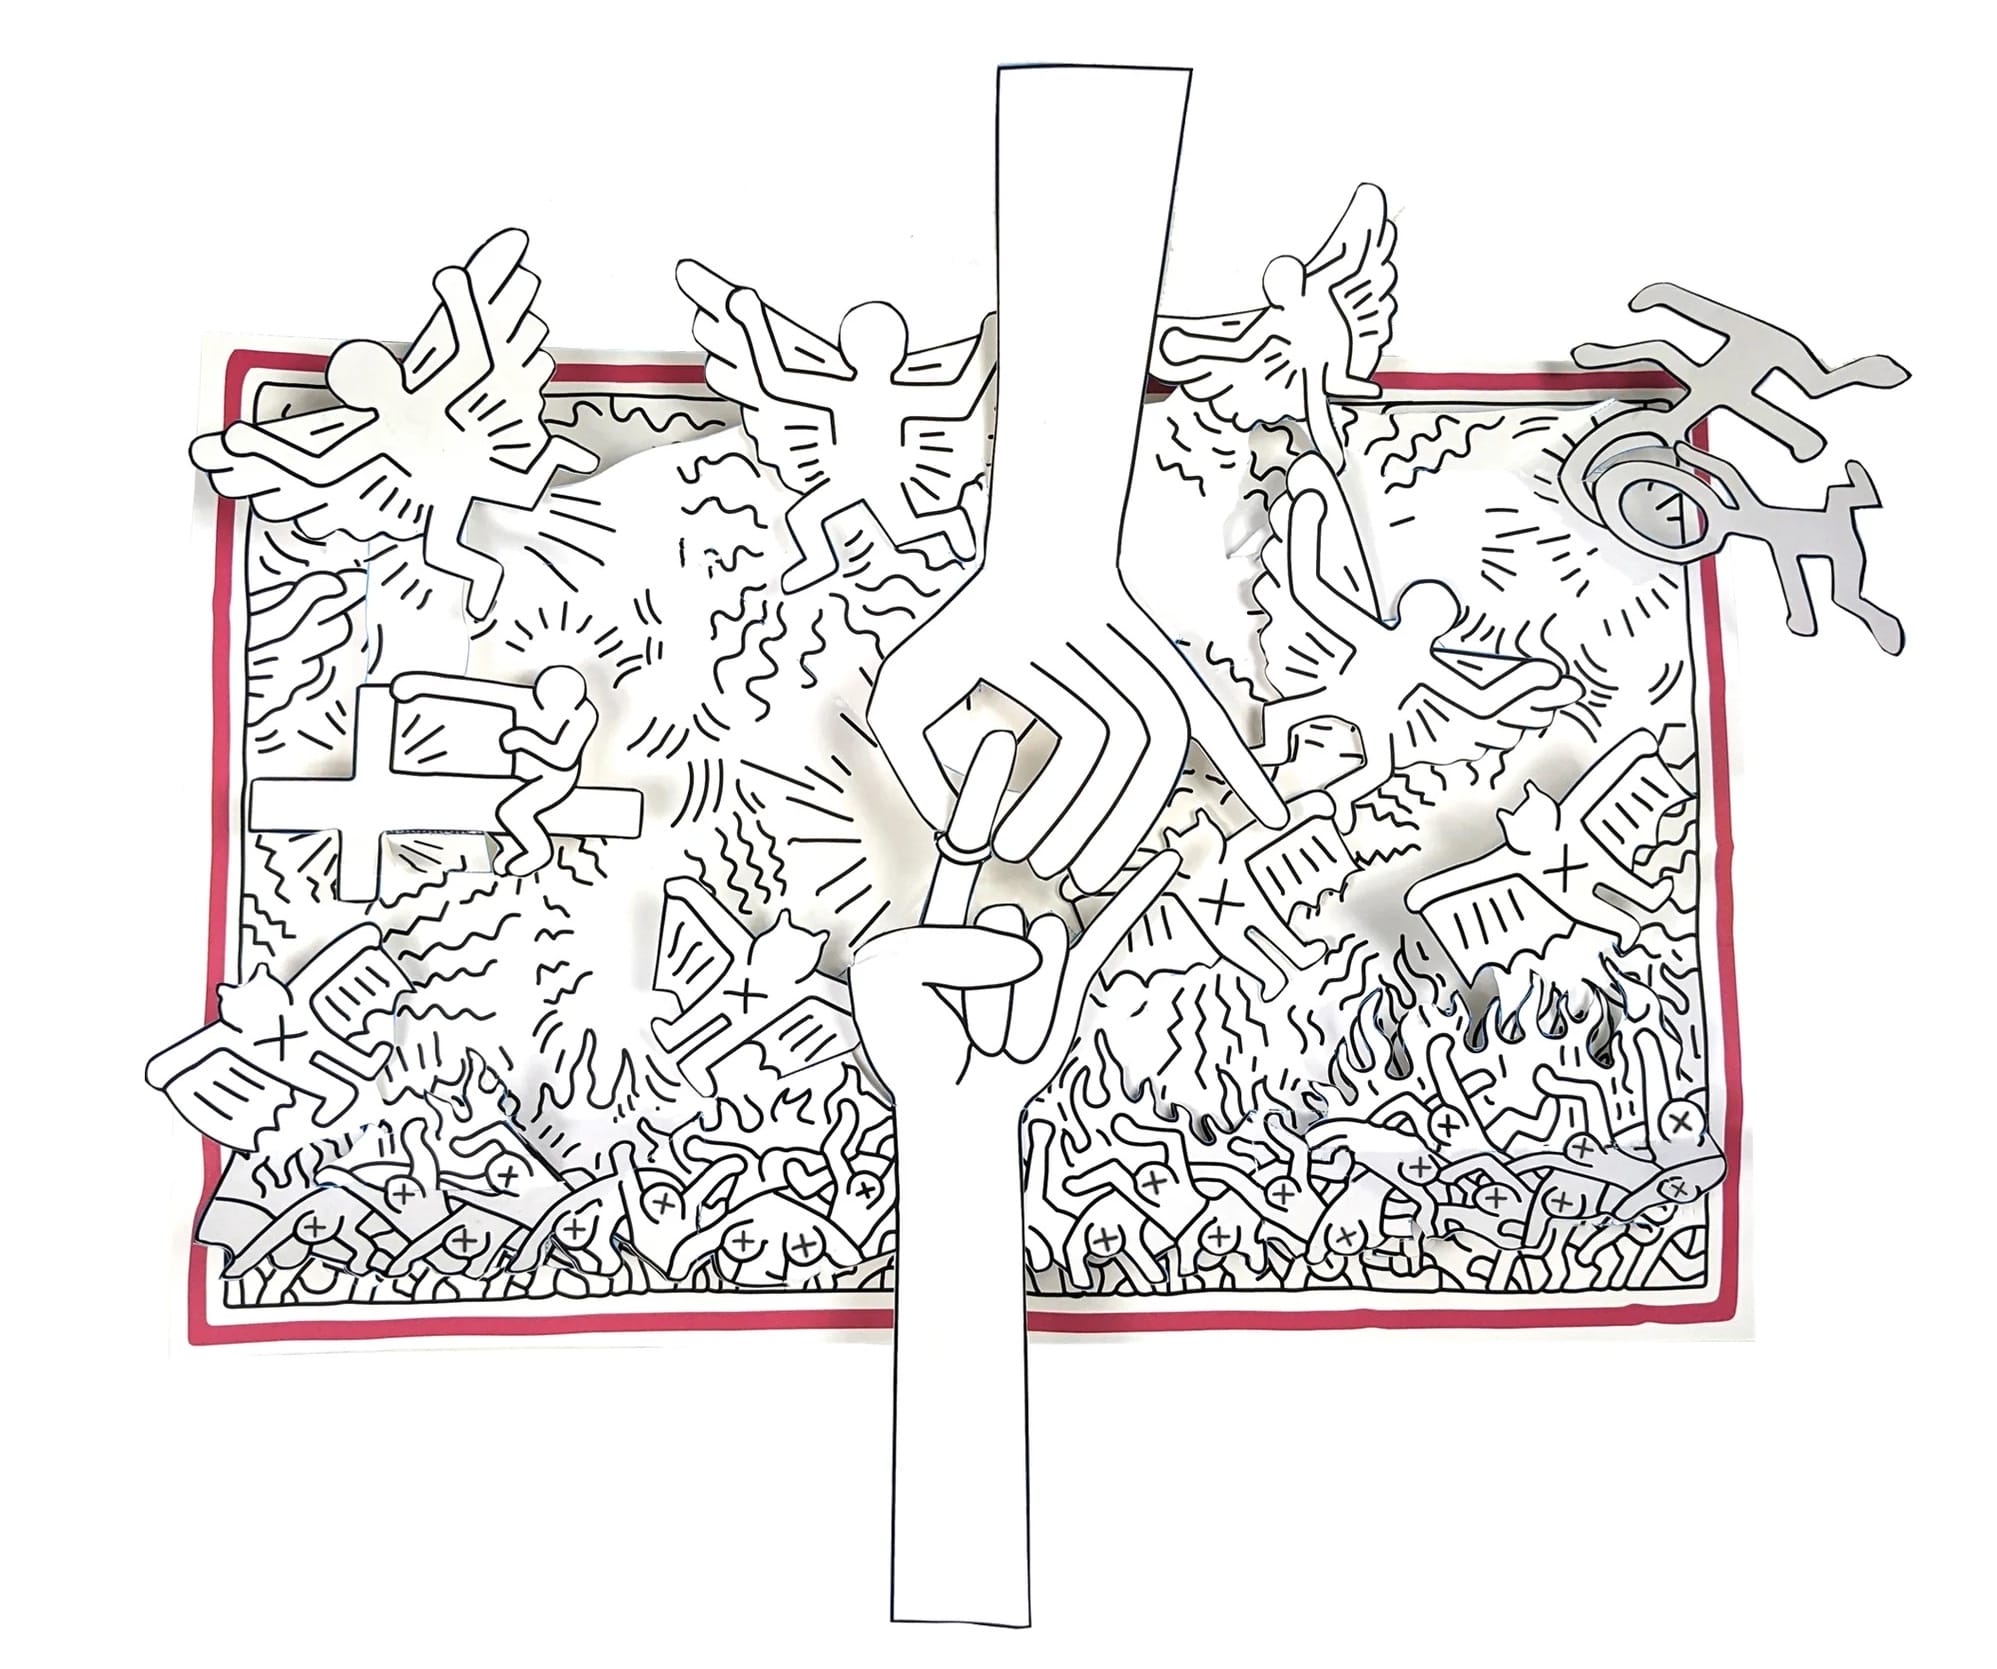 a pop-up paper spread from a pop-up book of artwork by Keith Haring, this piece depicting a black-and-white outlined artwork of two hands reaching across a plane with other figures in the background like angels and bats